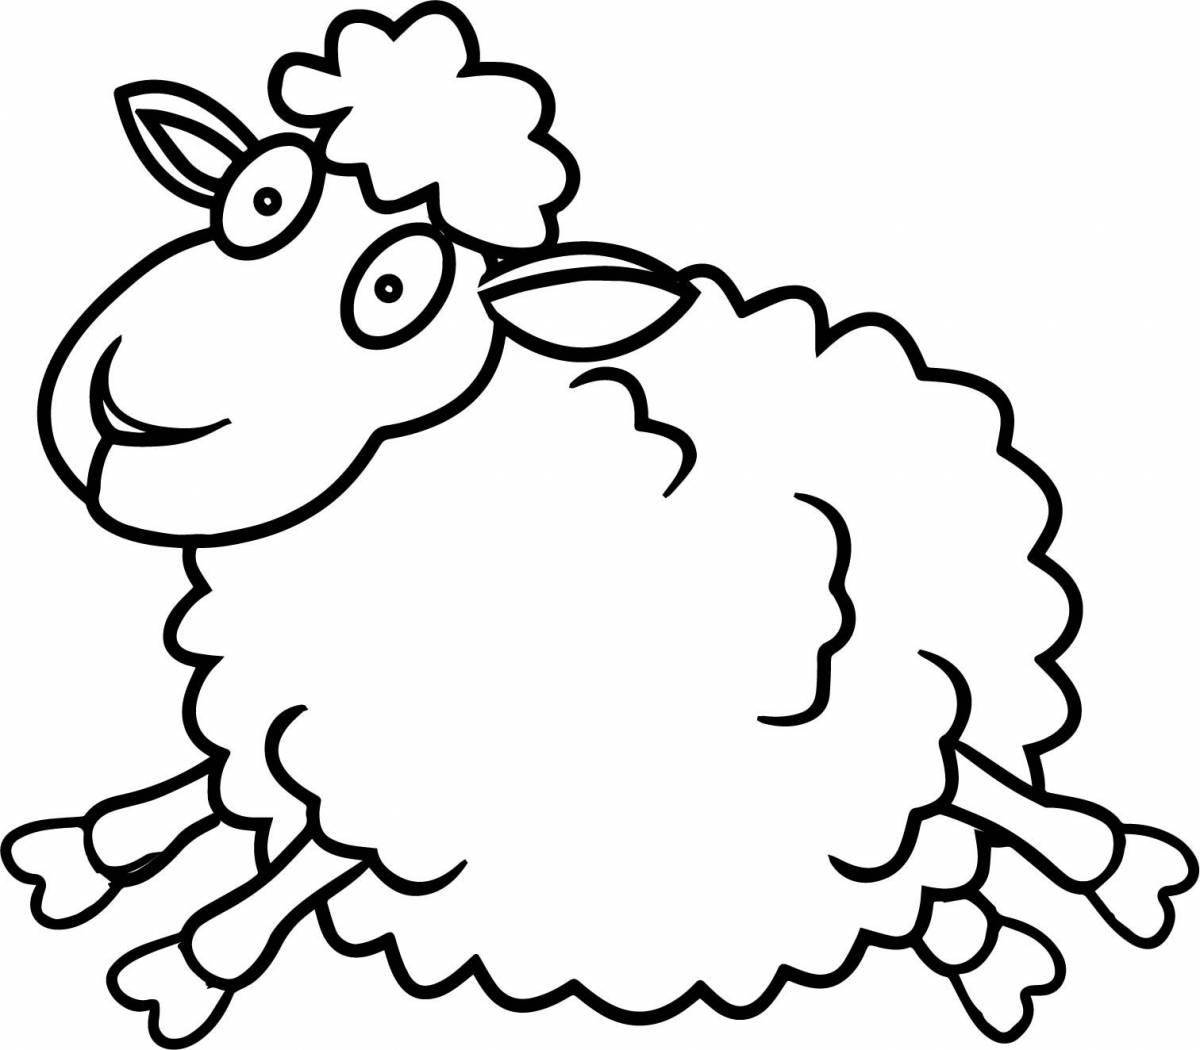 Coloring page nice ram for kids